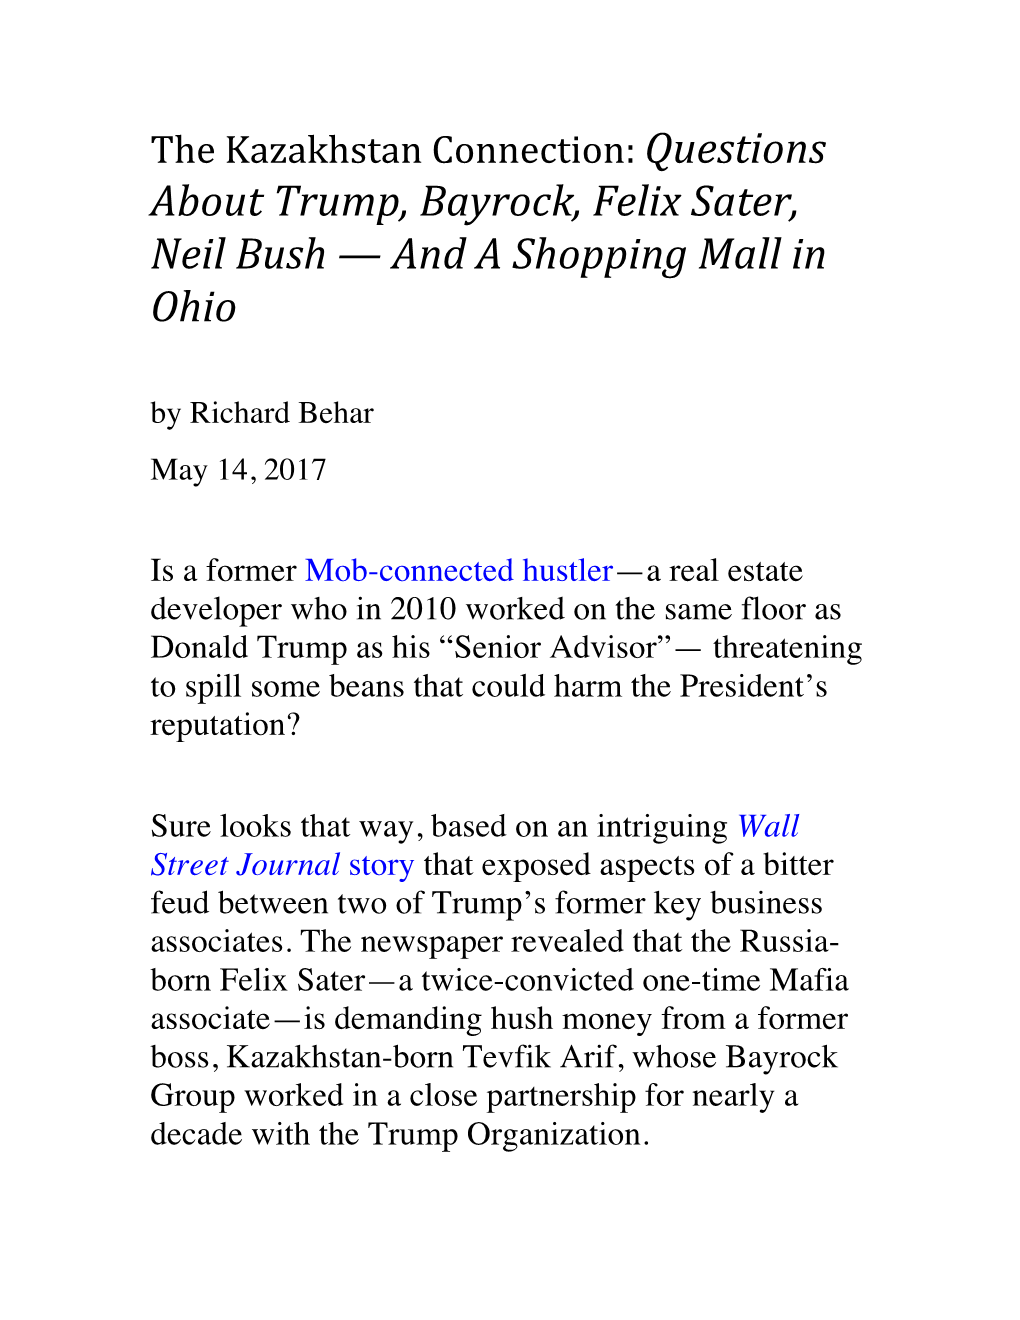 About Trump, Bayrock, Felix Sater, Neil Bush — and a Shopping Mall in Ohio